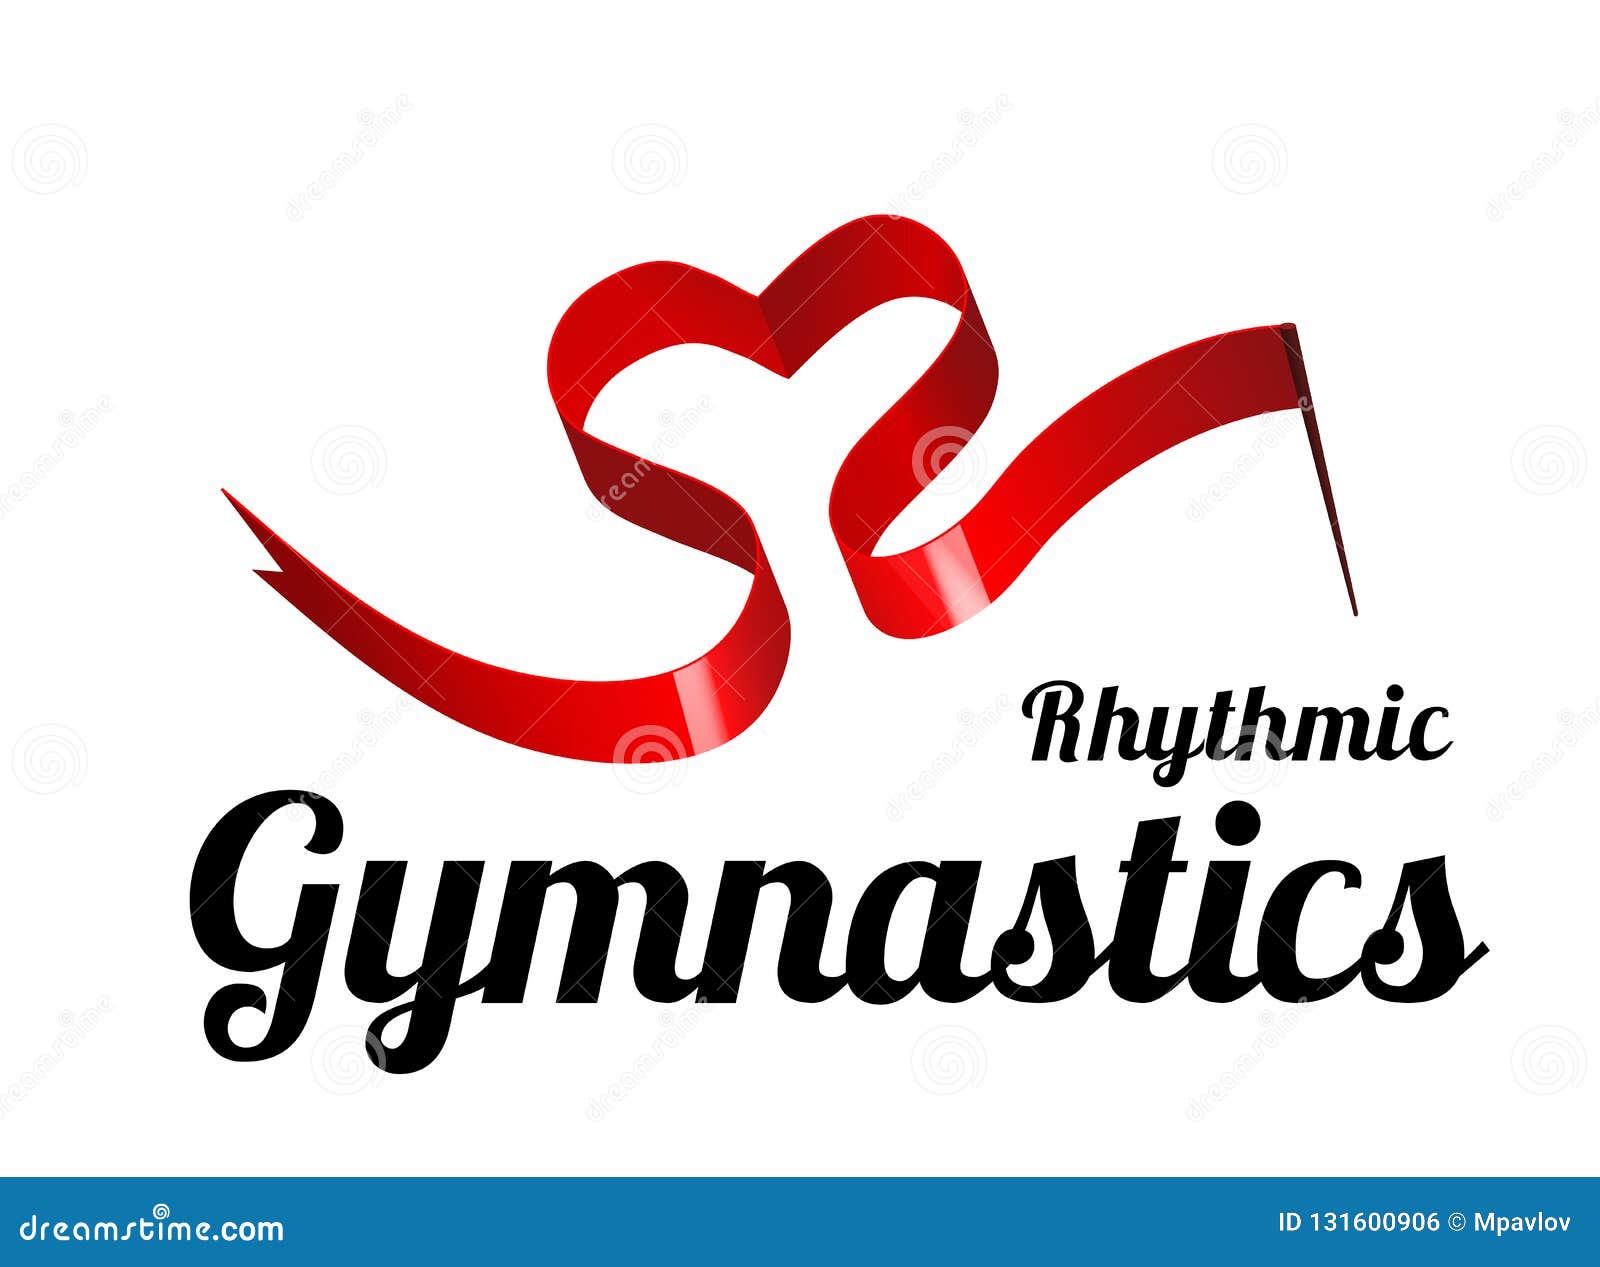 ribbon for rhythmic gymnastics in the  of a heart.   on white